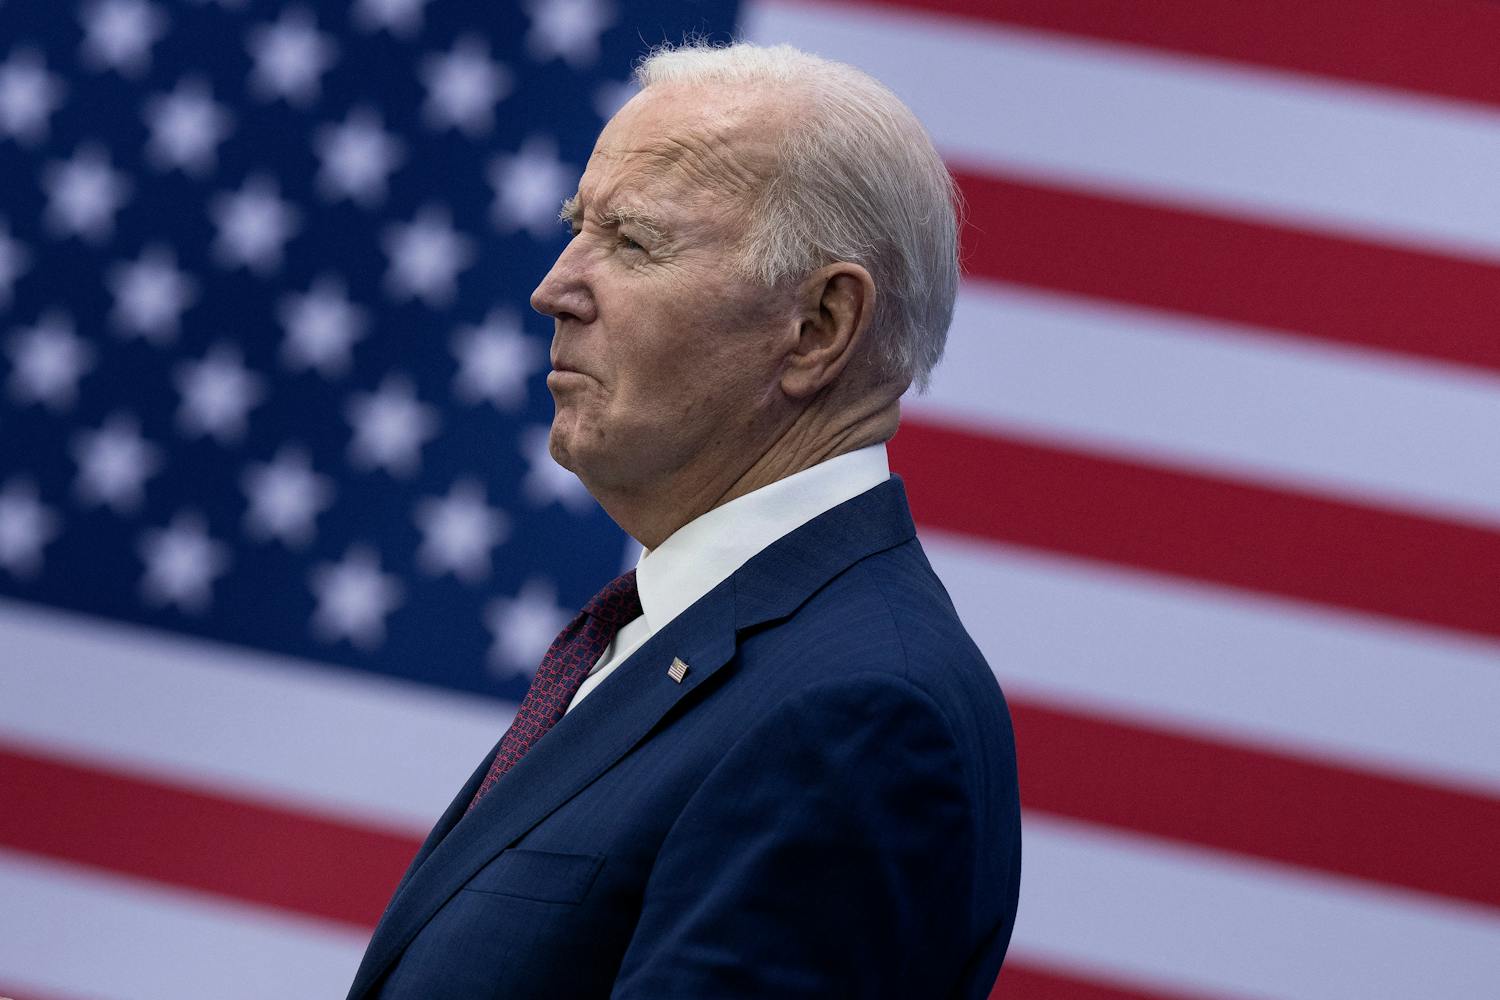 Biden presents the budget plan, but “the president is already paralyzed”